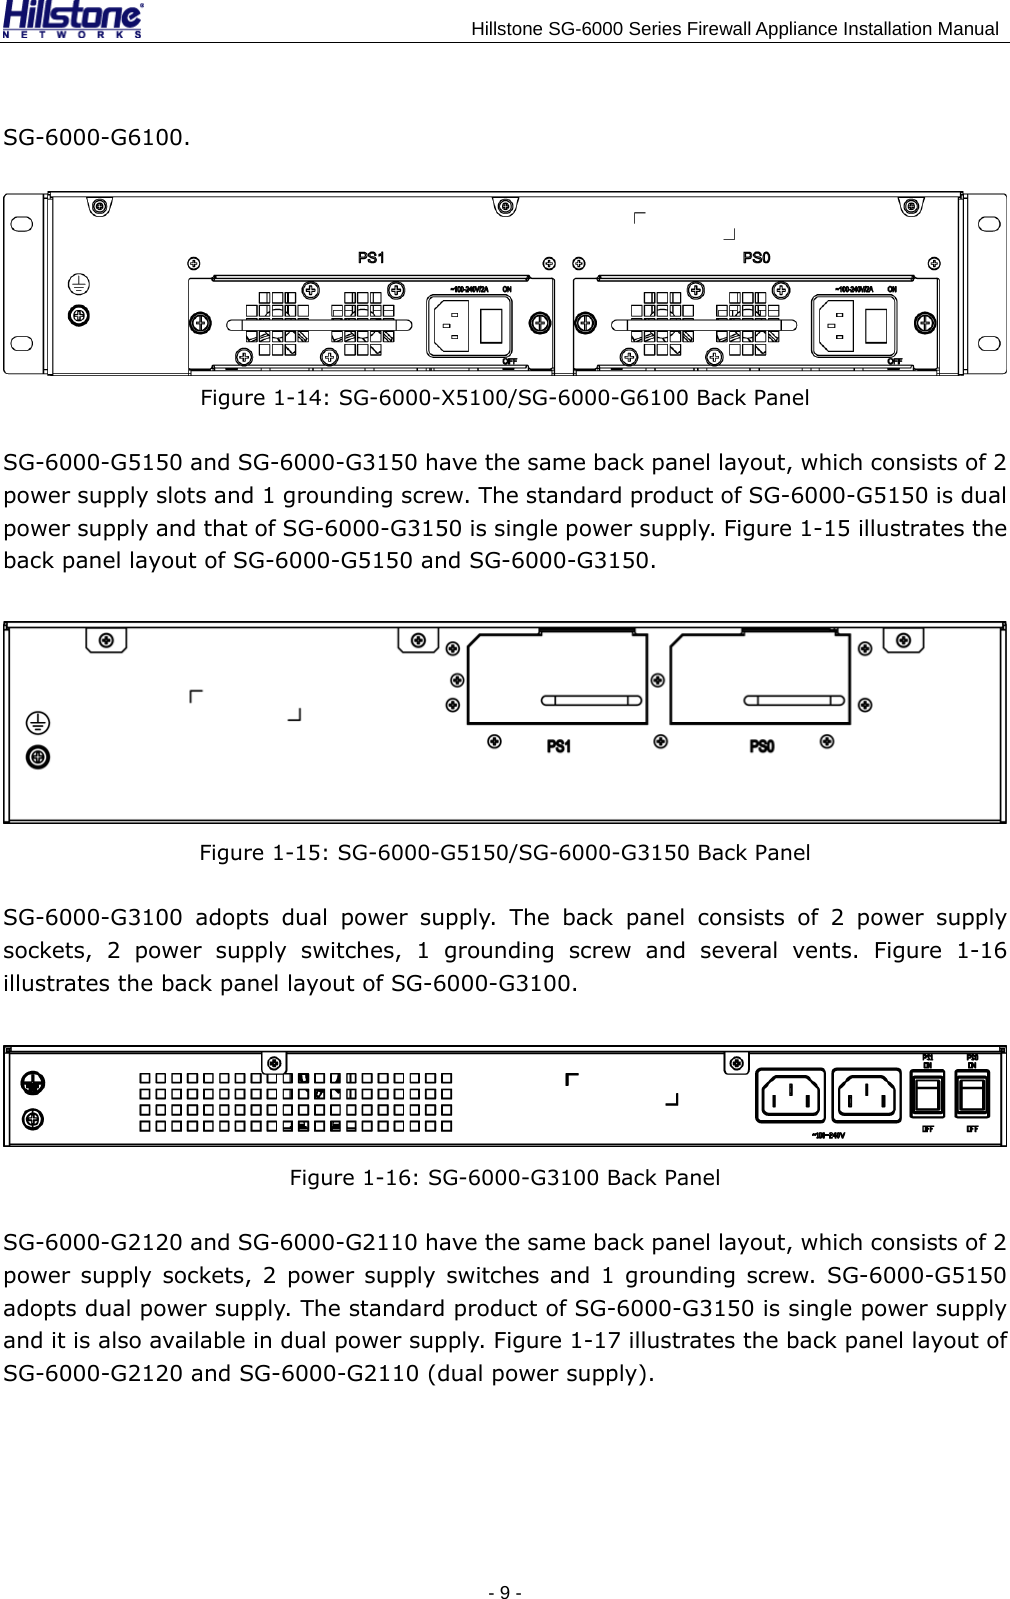                                    Hillstone SG-6000 Series Firewall Appliance Installation Manual SG-6000-G6100.  Figure 1-14: SG-6000-X5100/SG-6000-G6100 Back Panel SG-6000-G5150 and SG-6000-G3150 have the same back panel layout, which consists of 2 power supply slots and 1 grounding screw. The standard product of SG-6000-G5150 is dual power supply and that of SG-6000-G3150 is single power supply. Figure 1-15 illustrates the back panel layout of SG-6000-G5150 and SG-6000-G3150.  Figure 1-15: SG-6000-G5150/SG-6000-G3150 Back Panel SG-6000-G3100 adopts dual power supply. The back panel consists of 2 power supply sockets, 2 power supply switches, 1 grounding screw and several vents. Figure 1-16 illustrates the back panel layout of SG-6000-G3100.  Figure 1-16: SG-6000-G3100 Back Panel SG-6000-G2120 and SG-6000-G2110 have the same back panel layout, which consists of 2 power supply sockets, 2 power supply switches and 1 grounding screw. SG-6000-G5150 adopts dual power supply. The standard product of SG-6000-G3150 is single power supply and it is also available in dual power supply. Figure 1-17 illustrates the back panel layout of SG-6000-G2120 and SG-6000-G2110 (dual power supply). - 9 -  